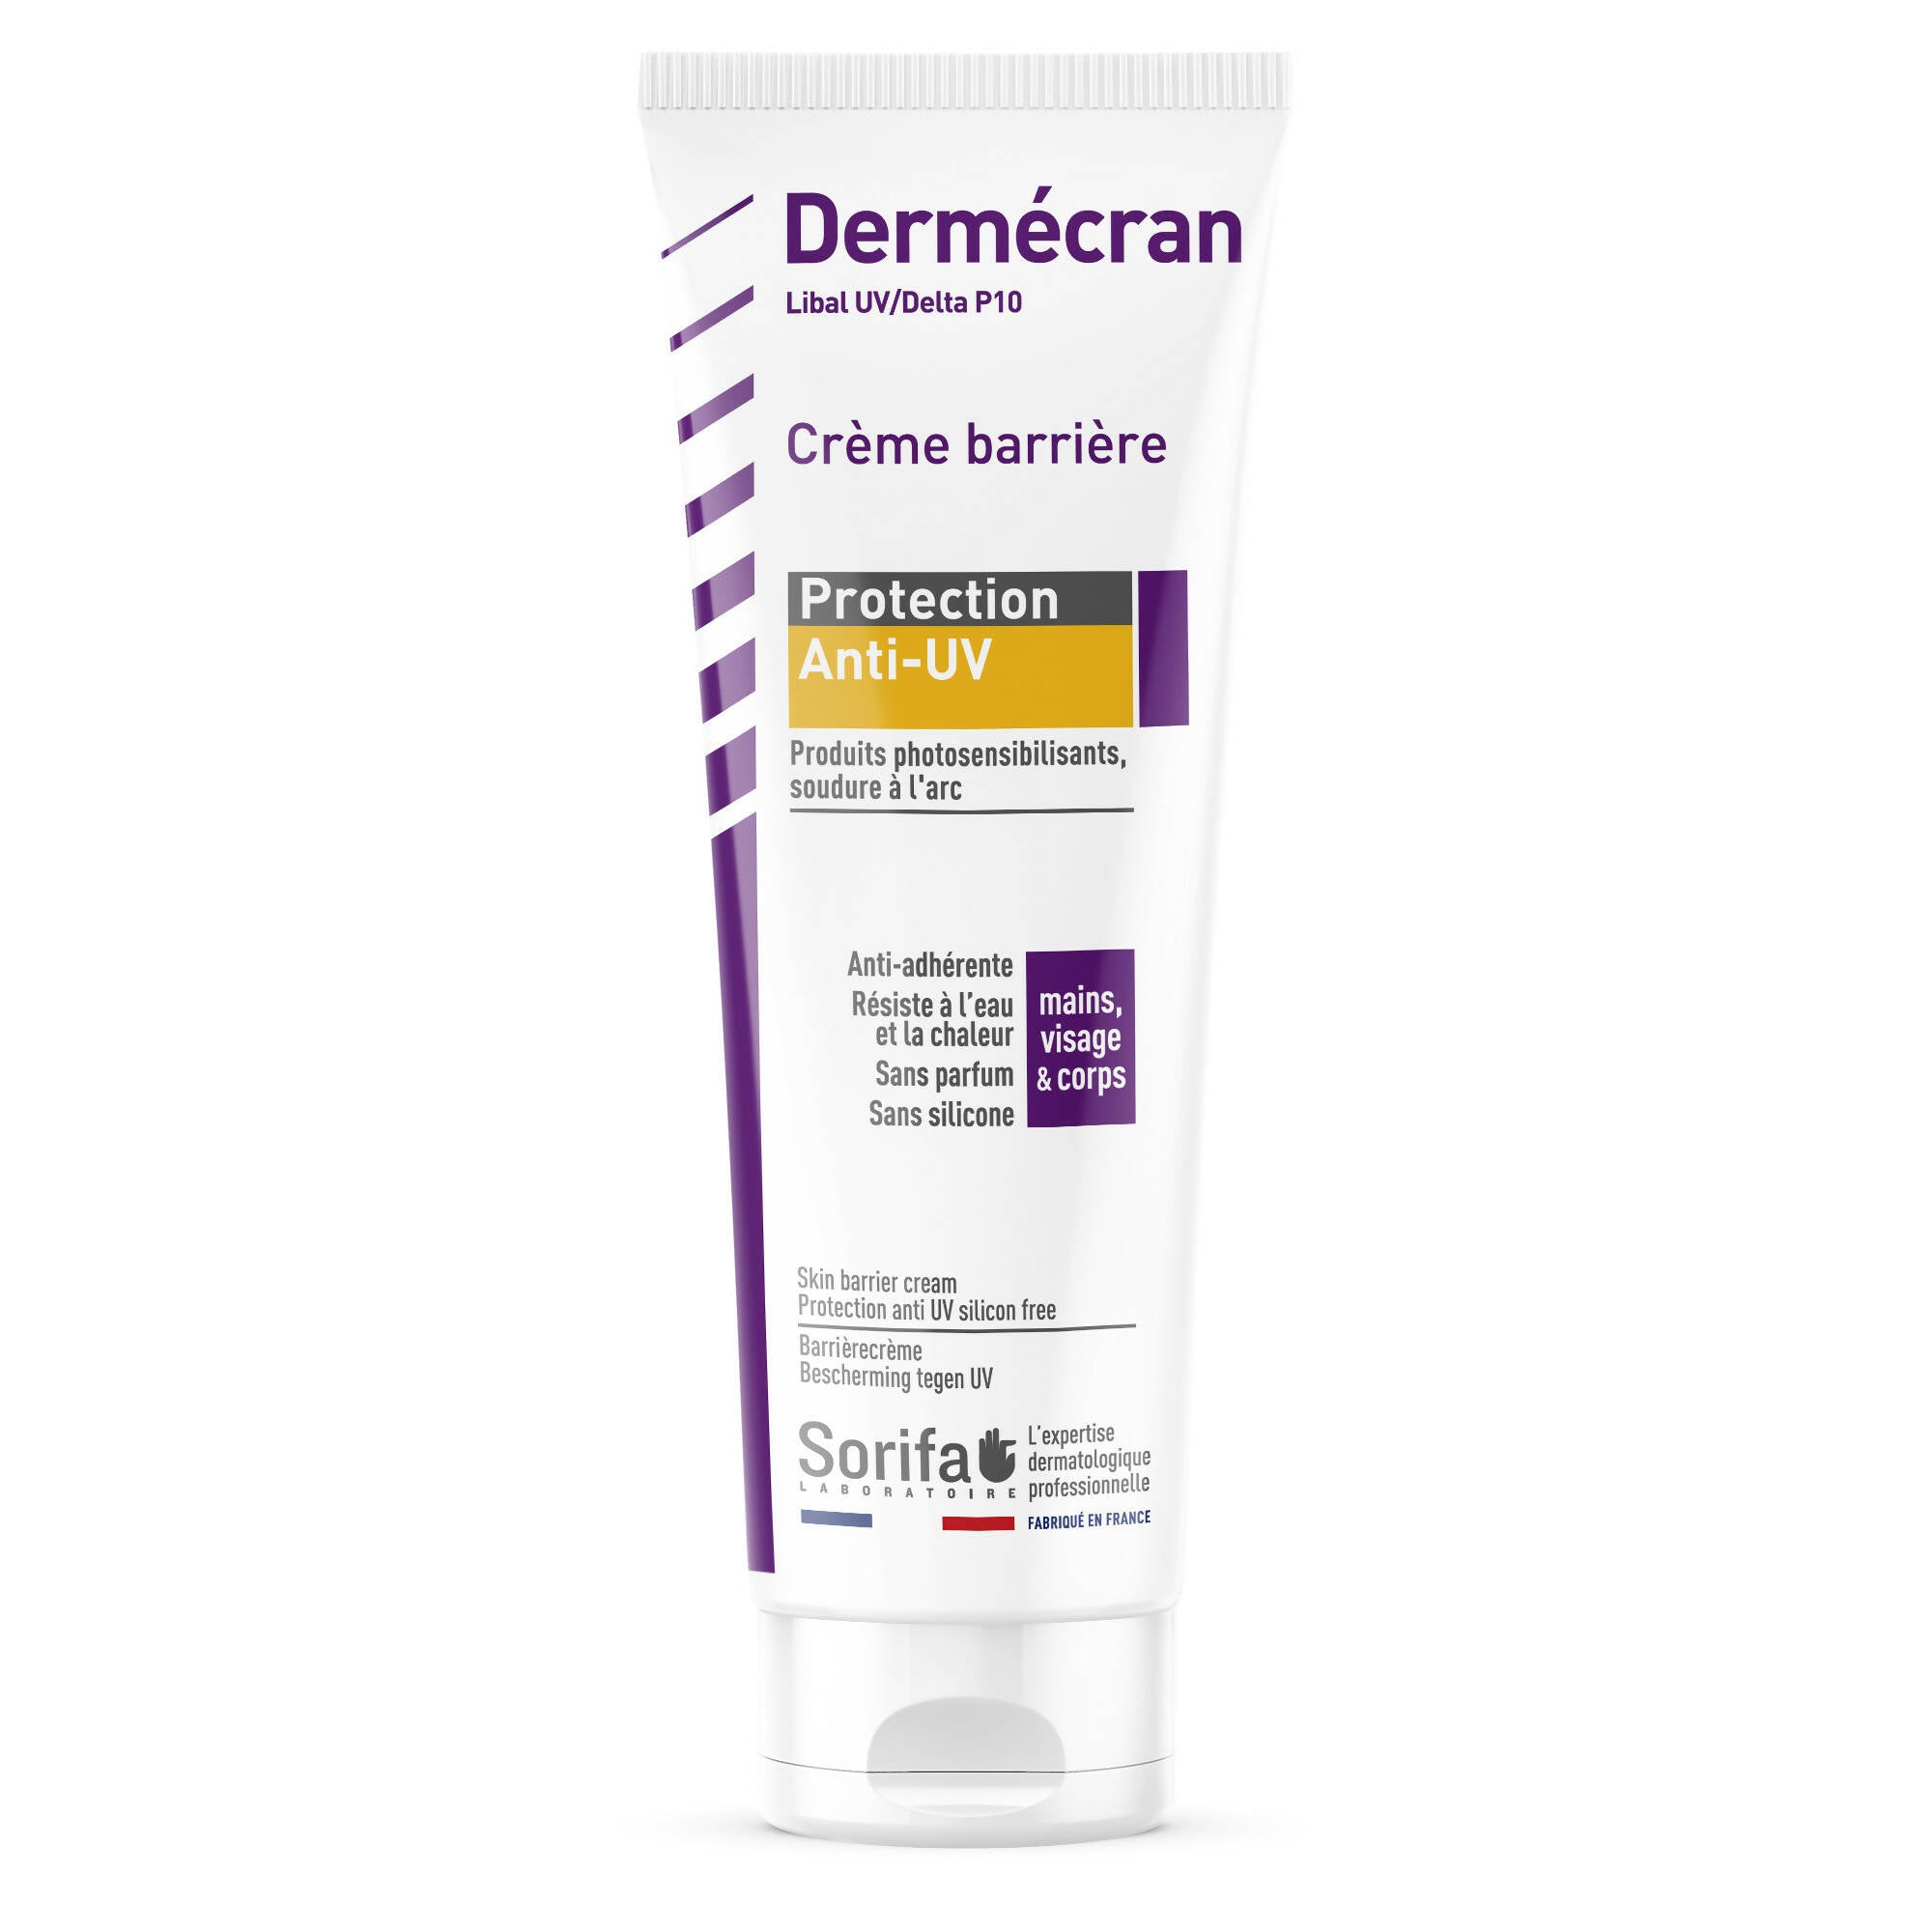 SORIFA - Set of 3 - Dermscreen - Barrier cream - ANTI-UV protection / Delta P10 - Soldering - Photo-sensitizing products - Hands, face and body - High tolerance - 125 ml tube. - 0